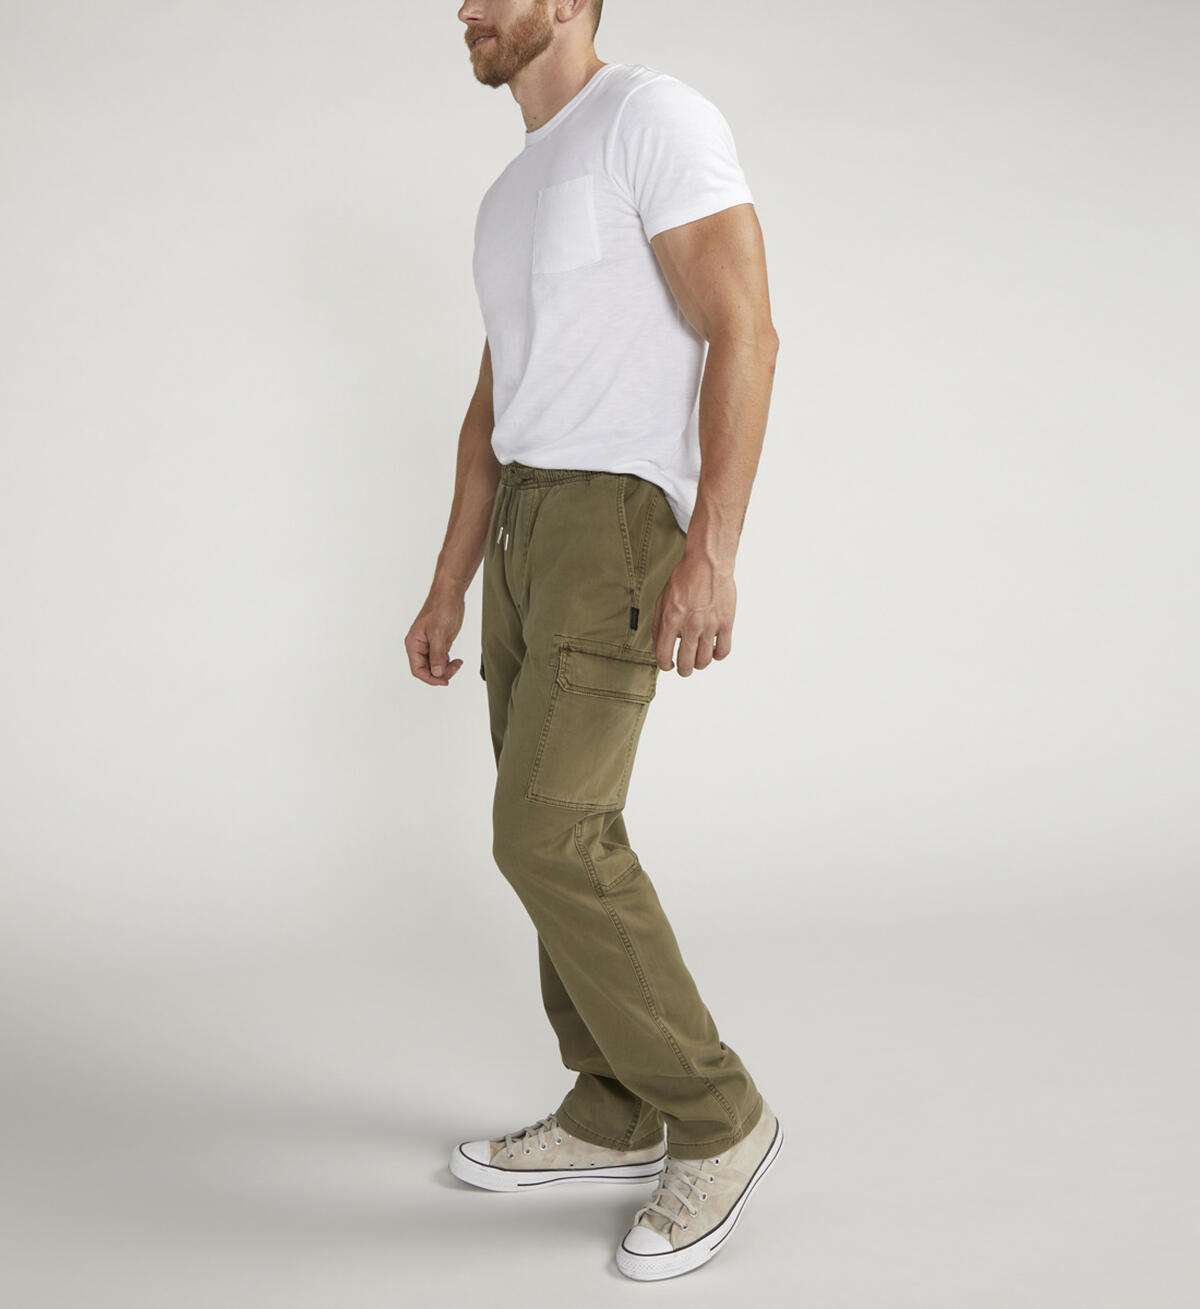 Pull-On Cargo Pant, Olive, hi-res image number 4